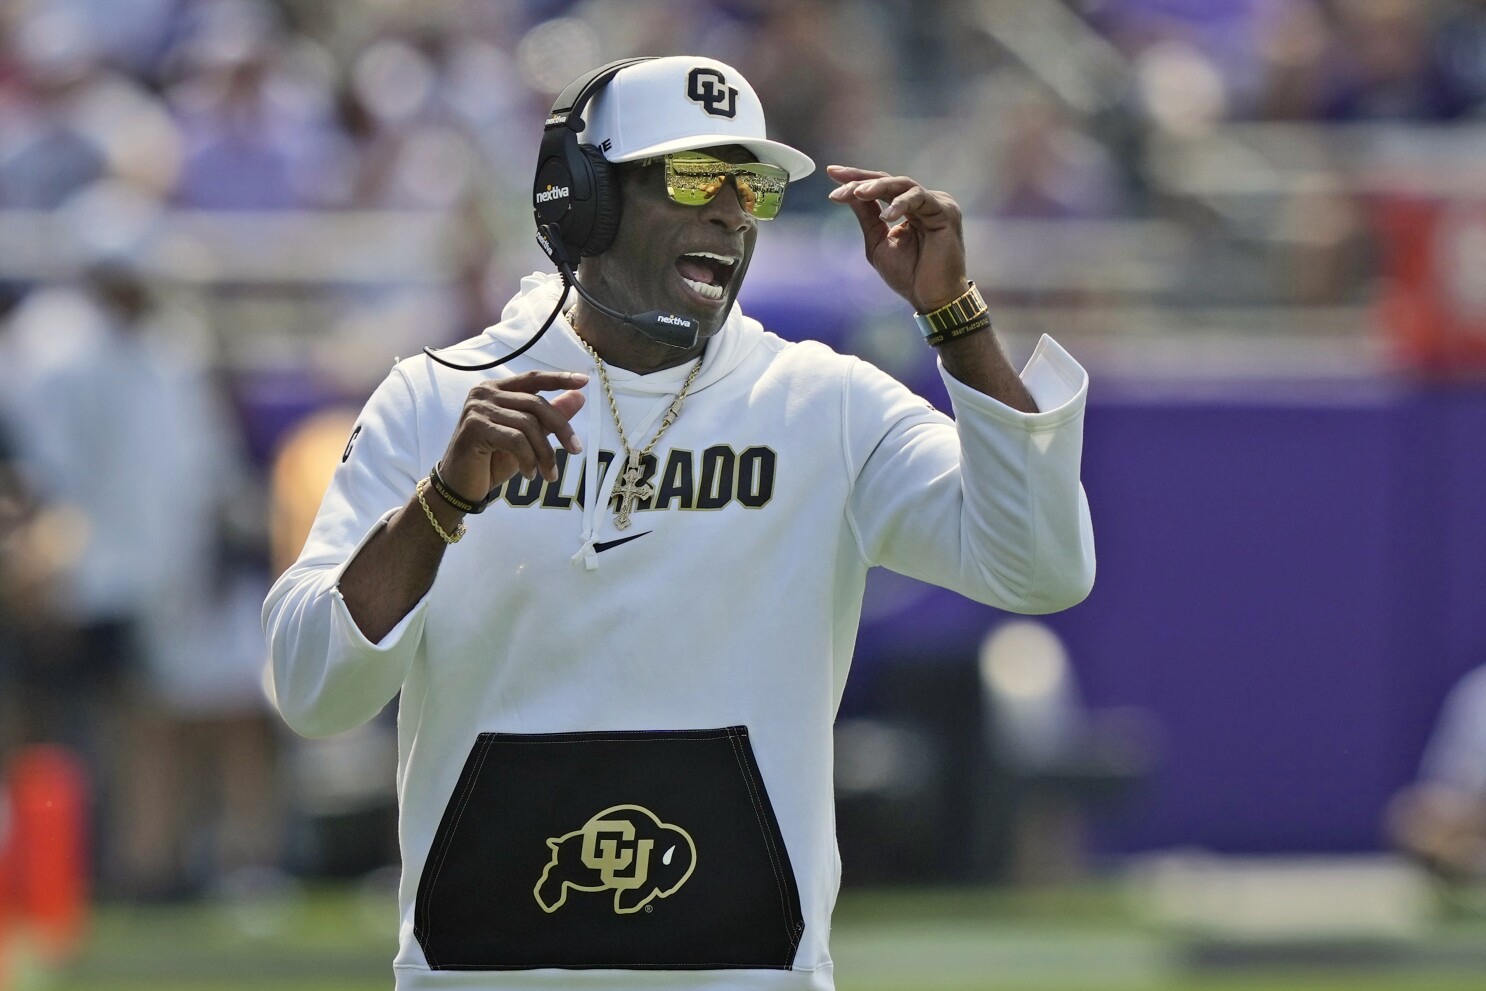 Buffs give 'Prime' one cheerful debut